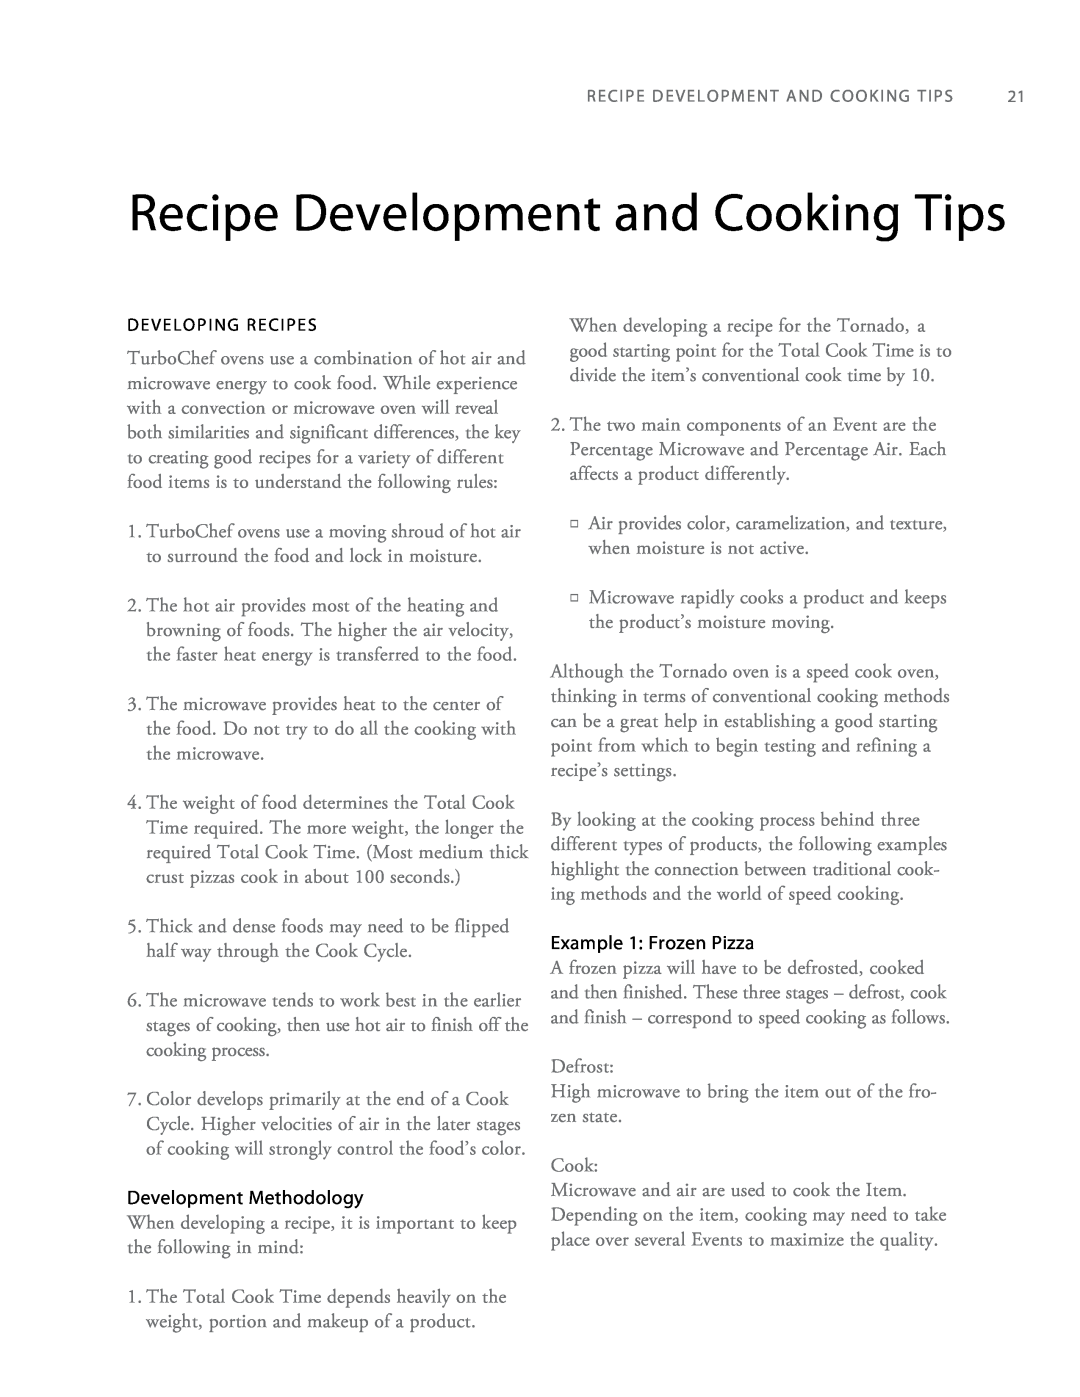 Turbo Chef Technologies Tornado 2 owner manual Recipe Development and Cooking Tips 